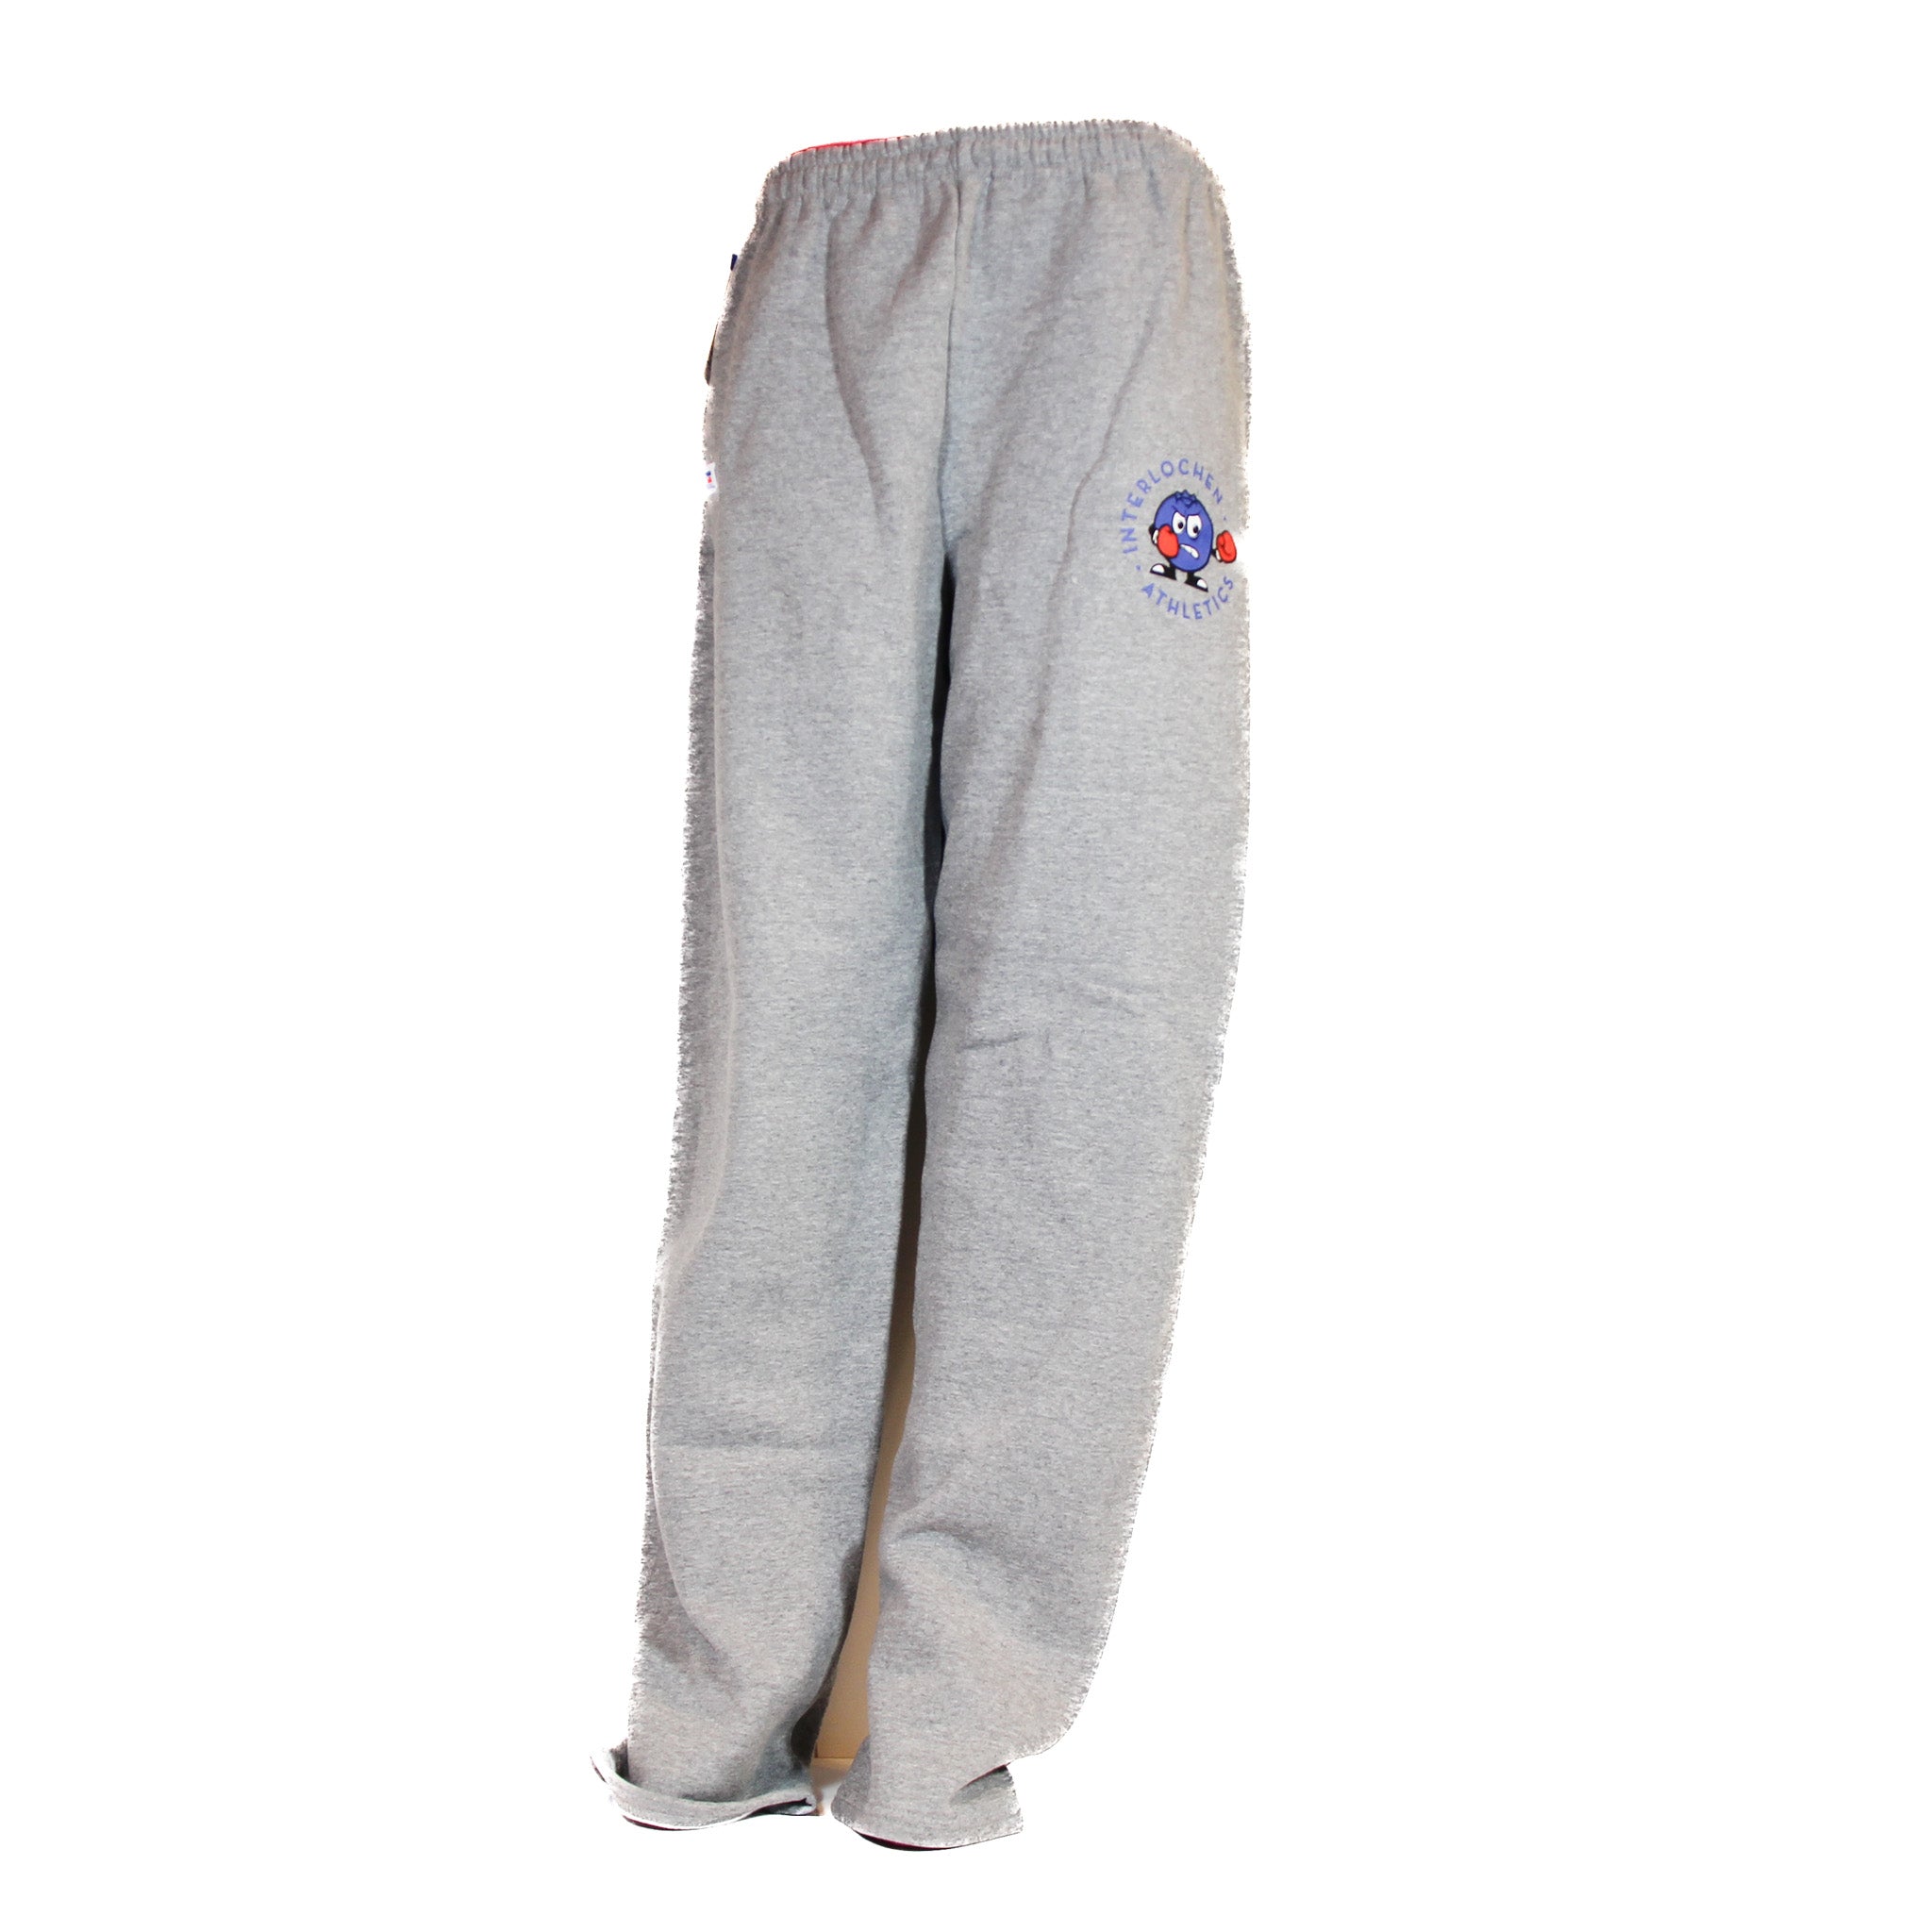 Fighting Blueberry Sweatpants by Russell Athletic | Interlochen